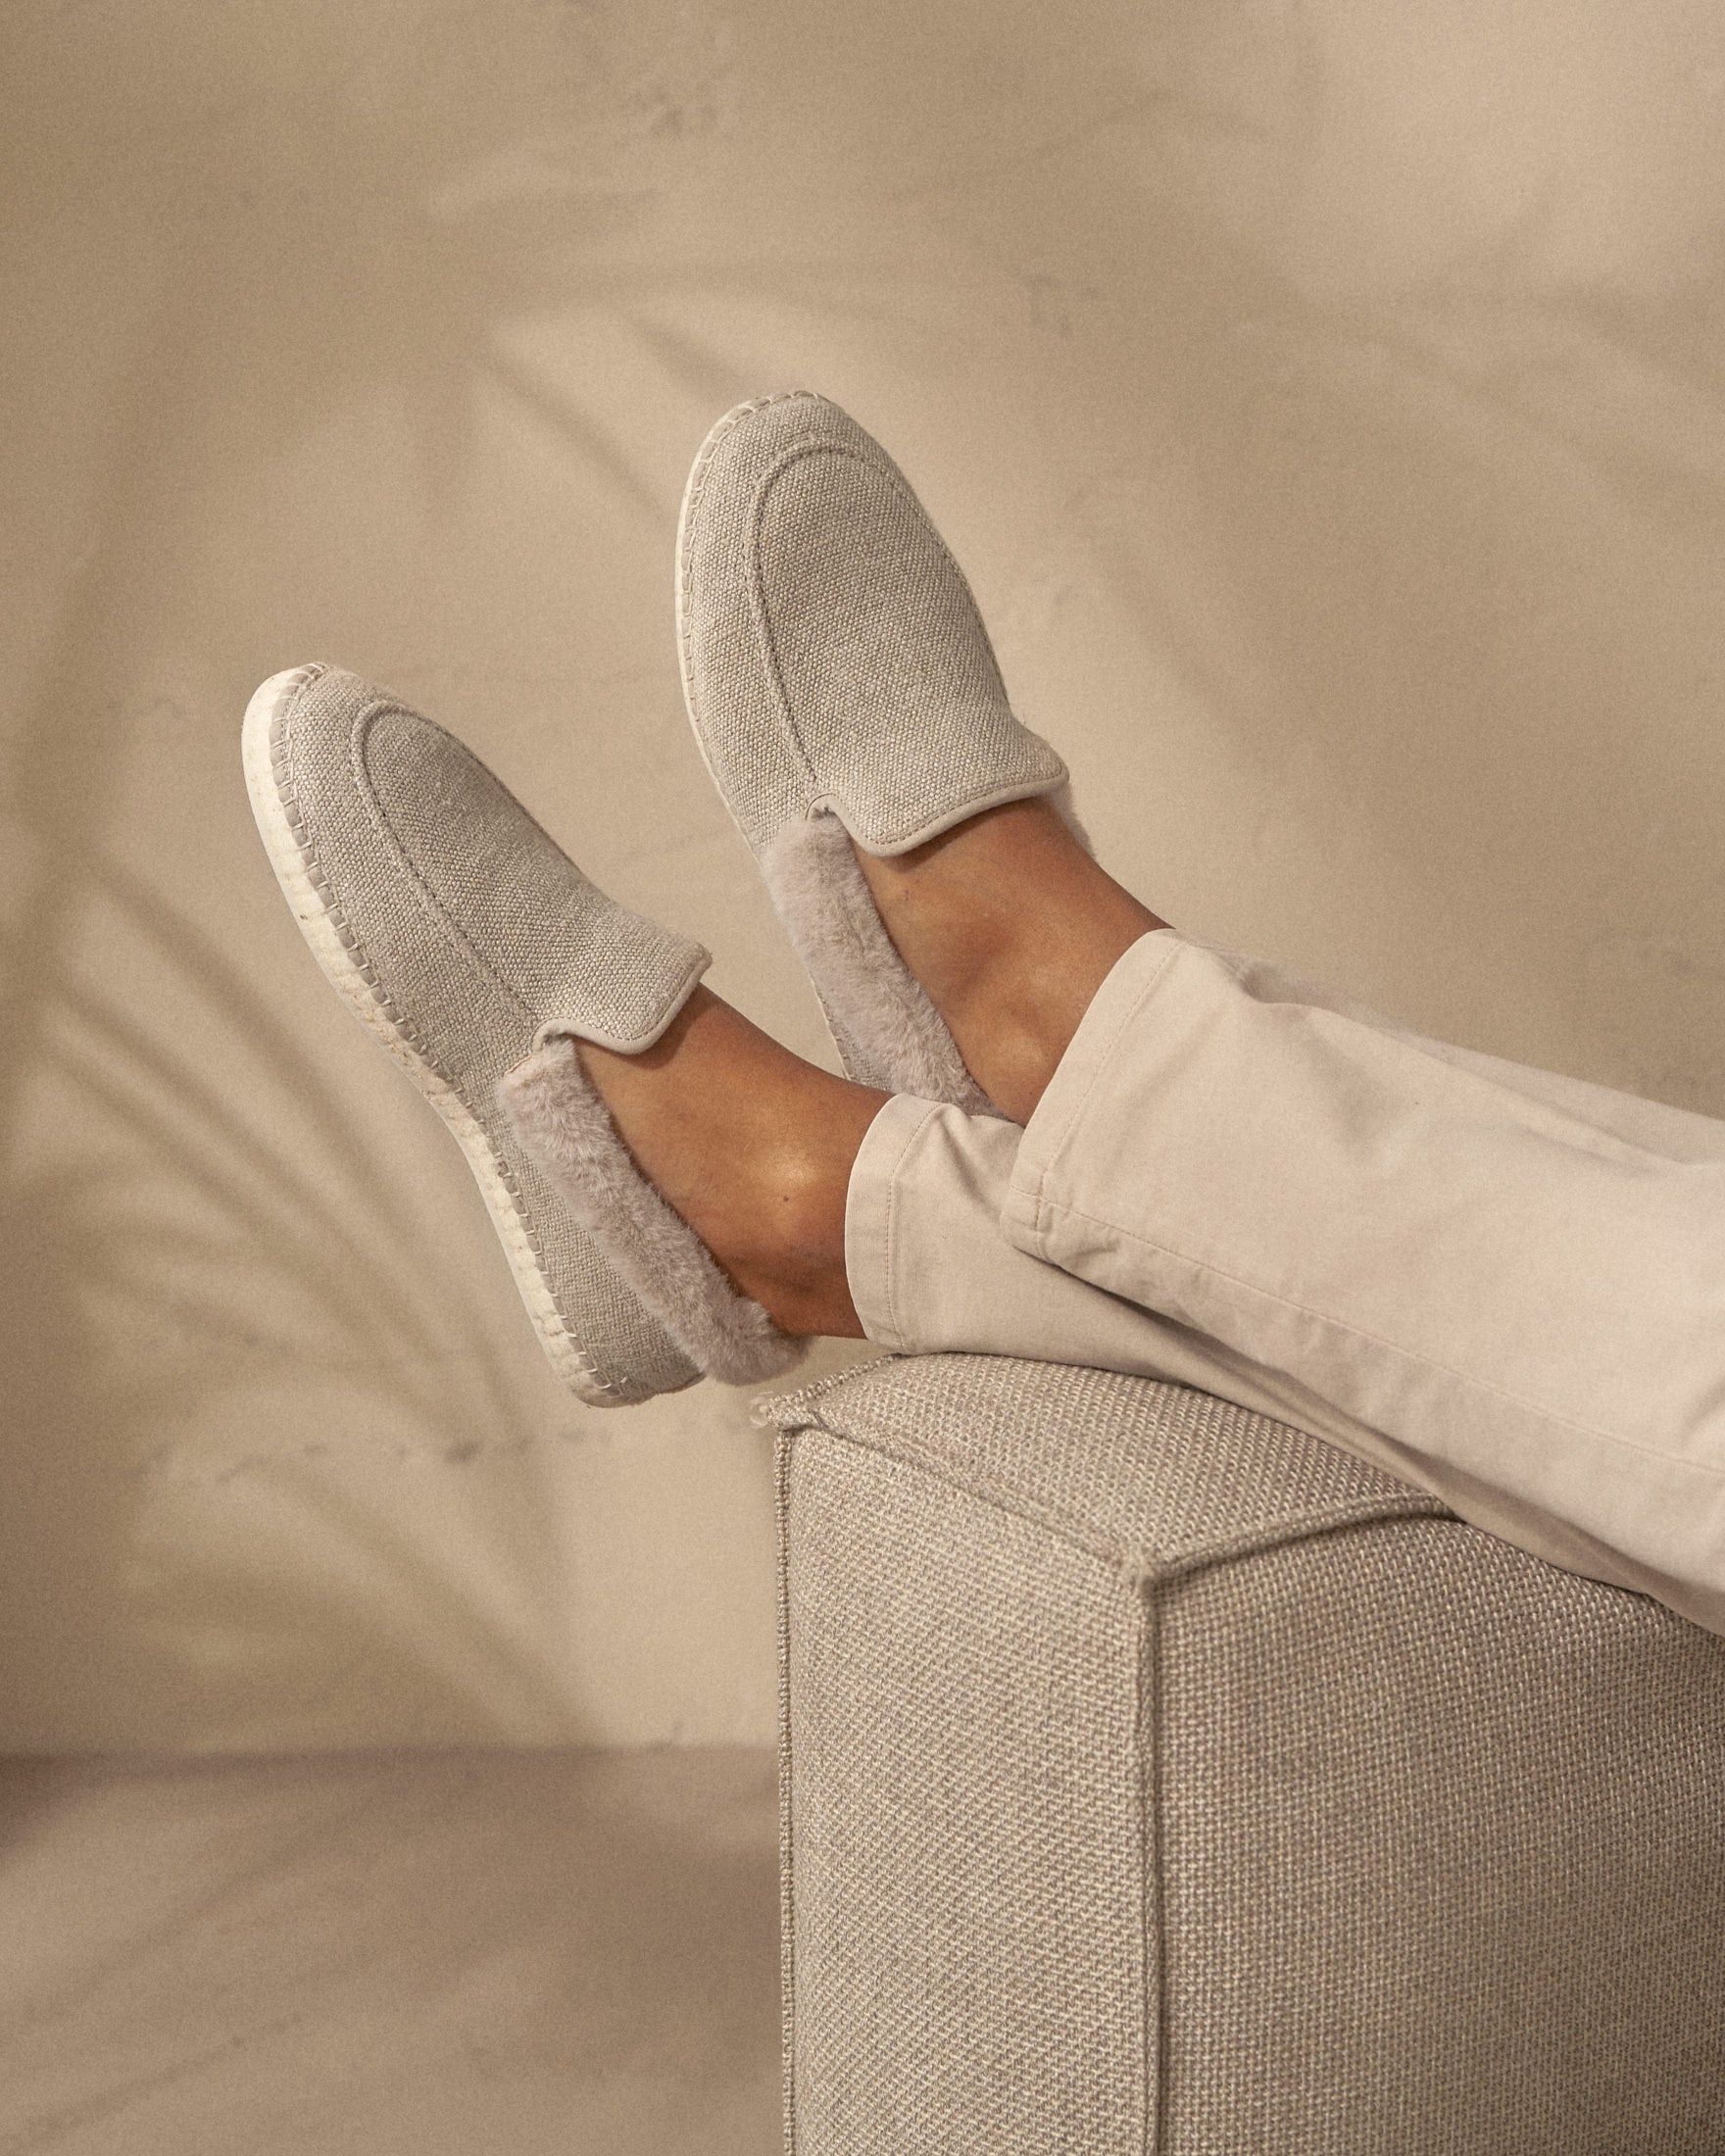 Organic Hemp And Faux Fur Loafers - Natural